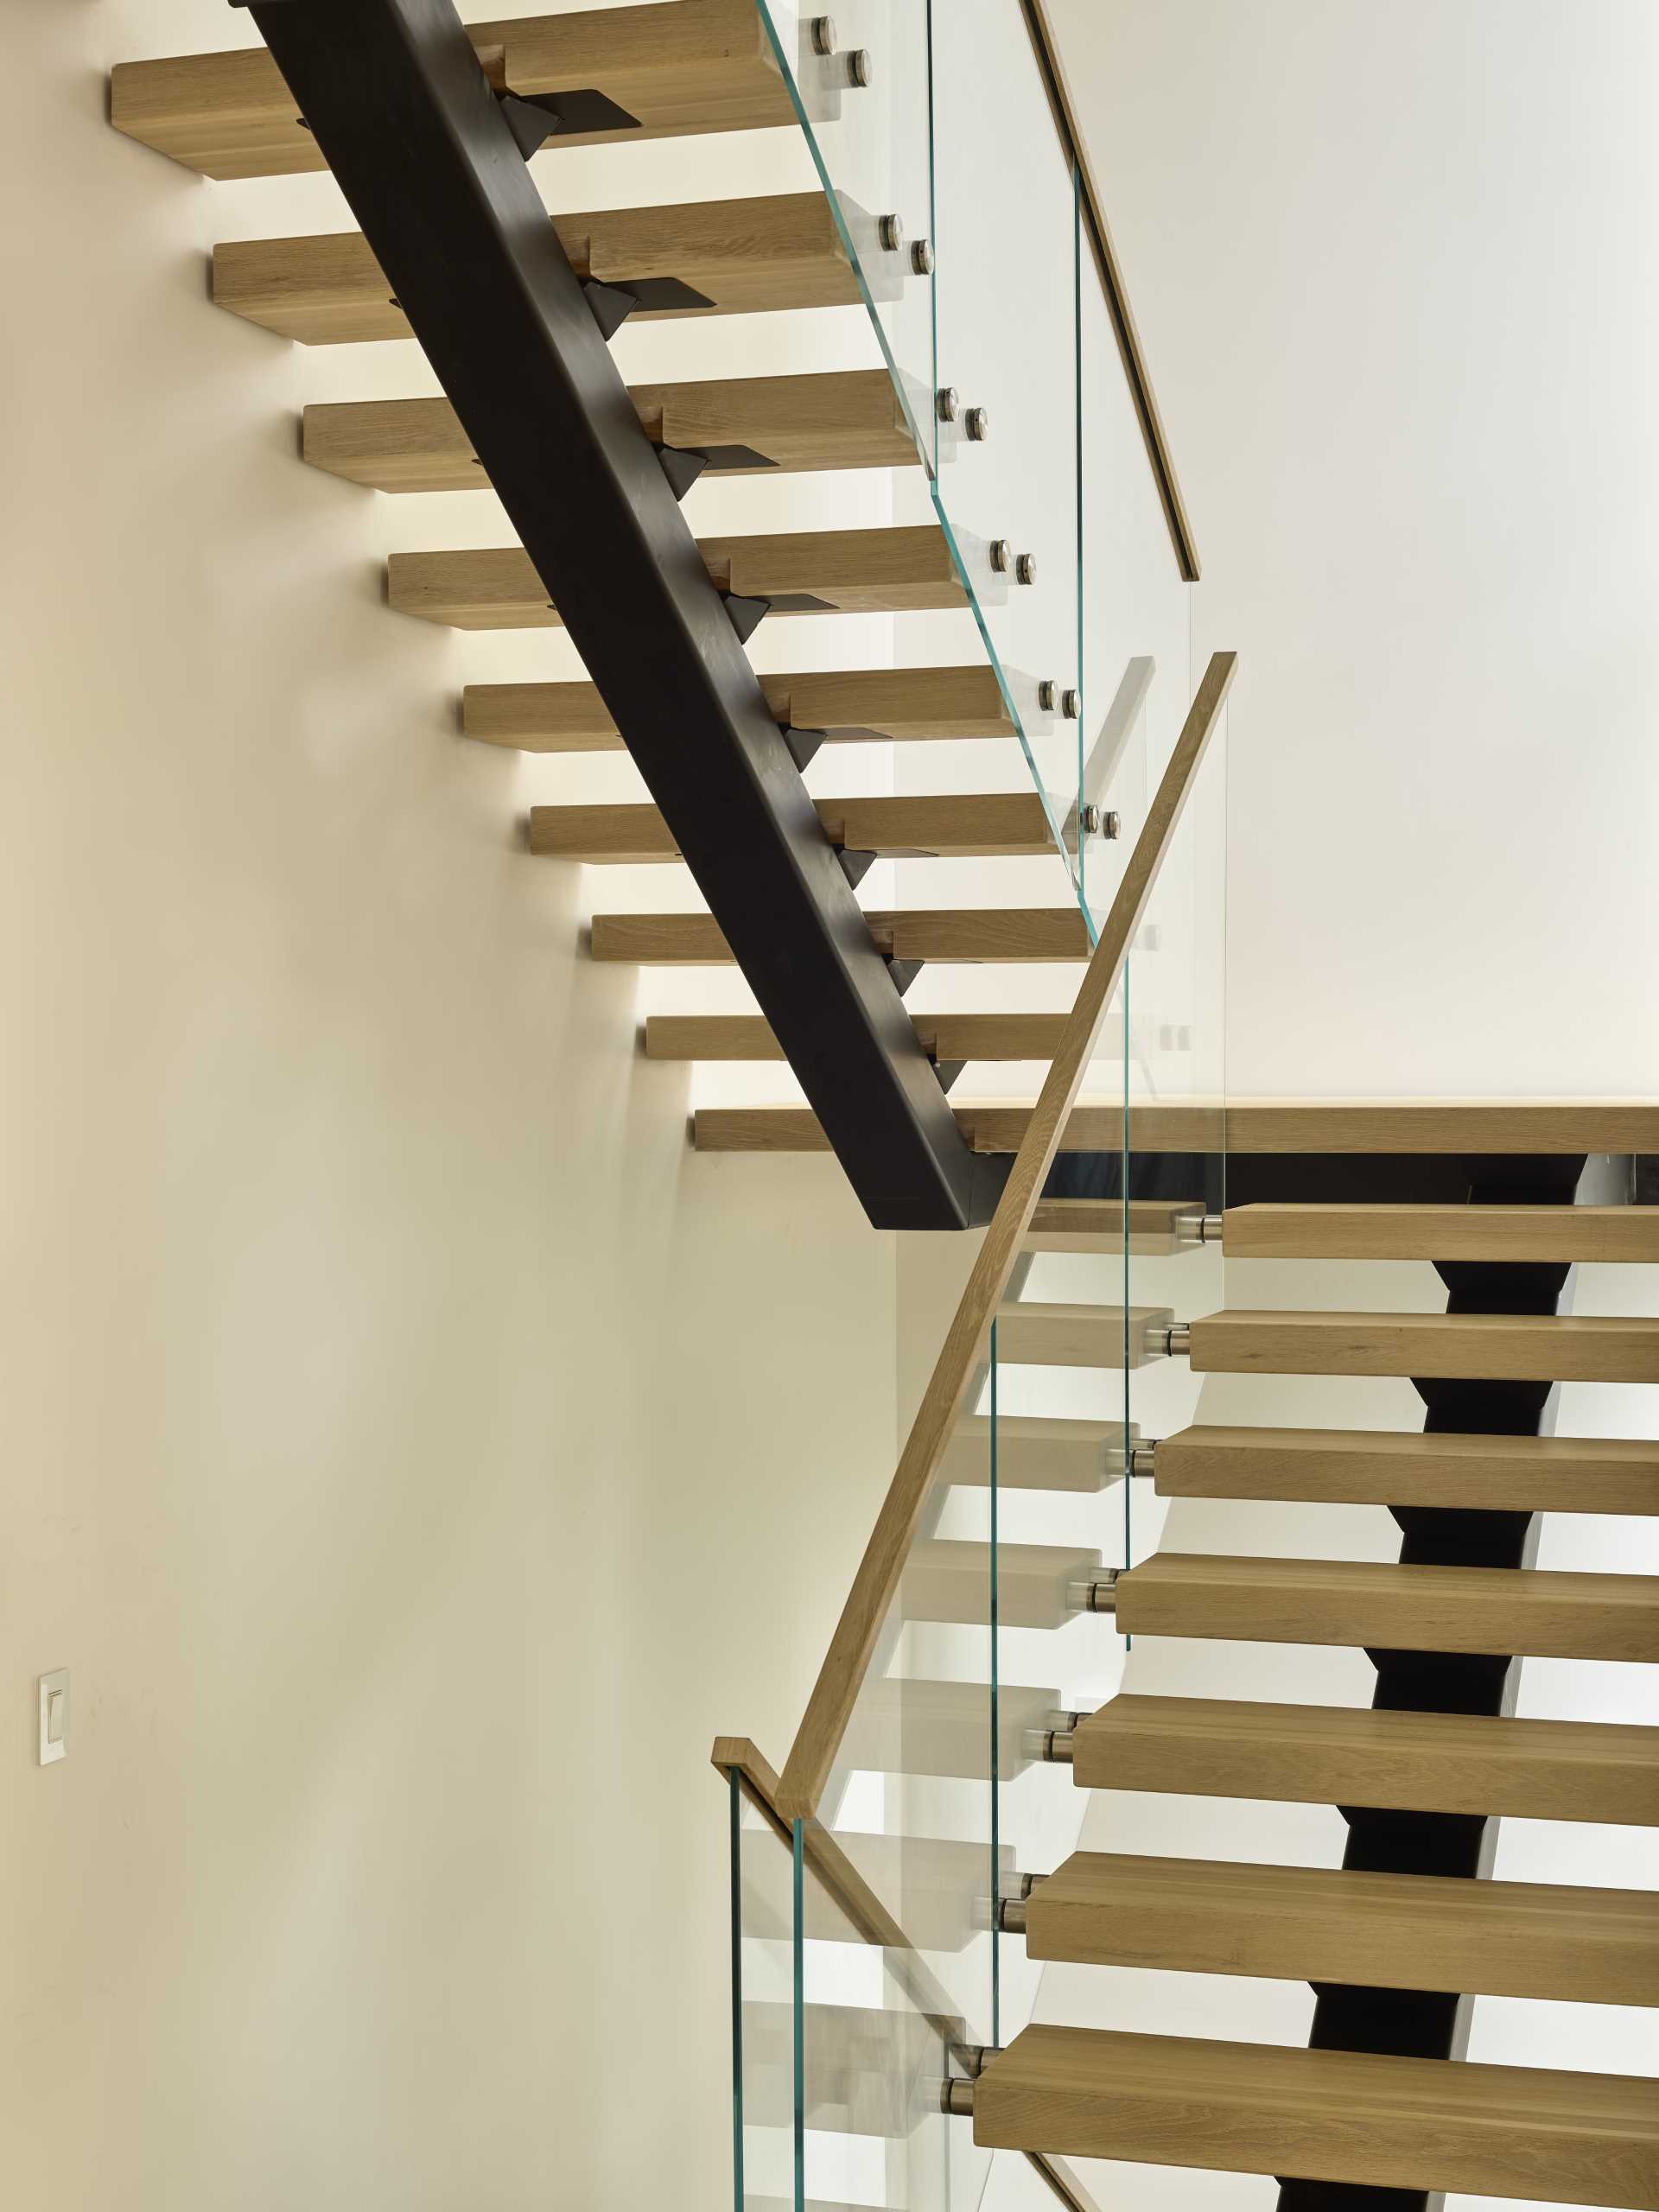 Wood and steel stairs with gl، railings connect the various floors of this modern ،me.